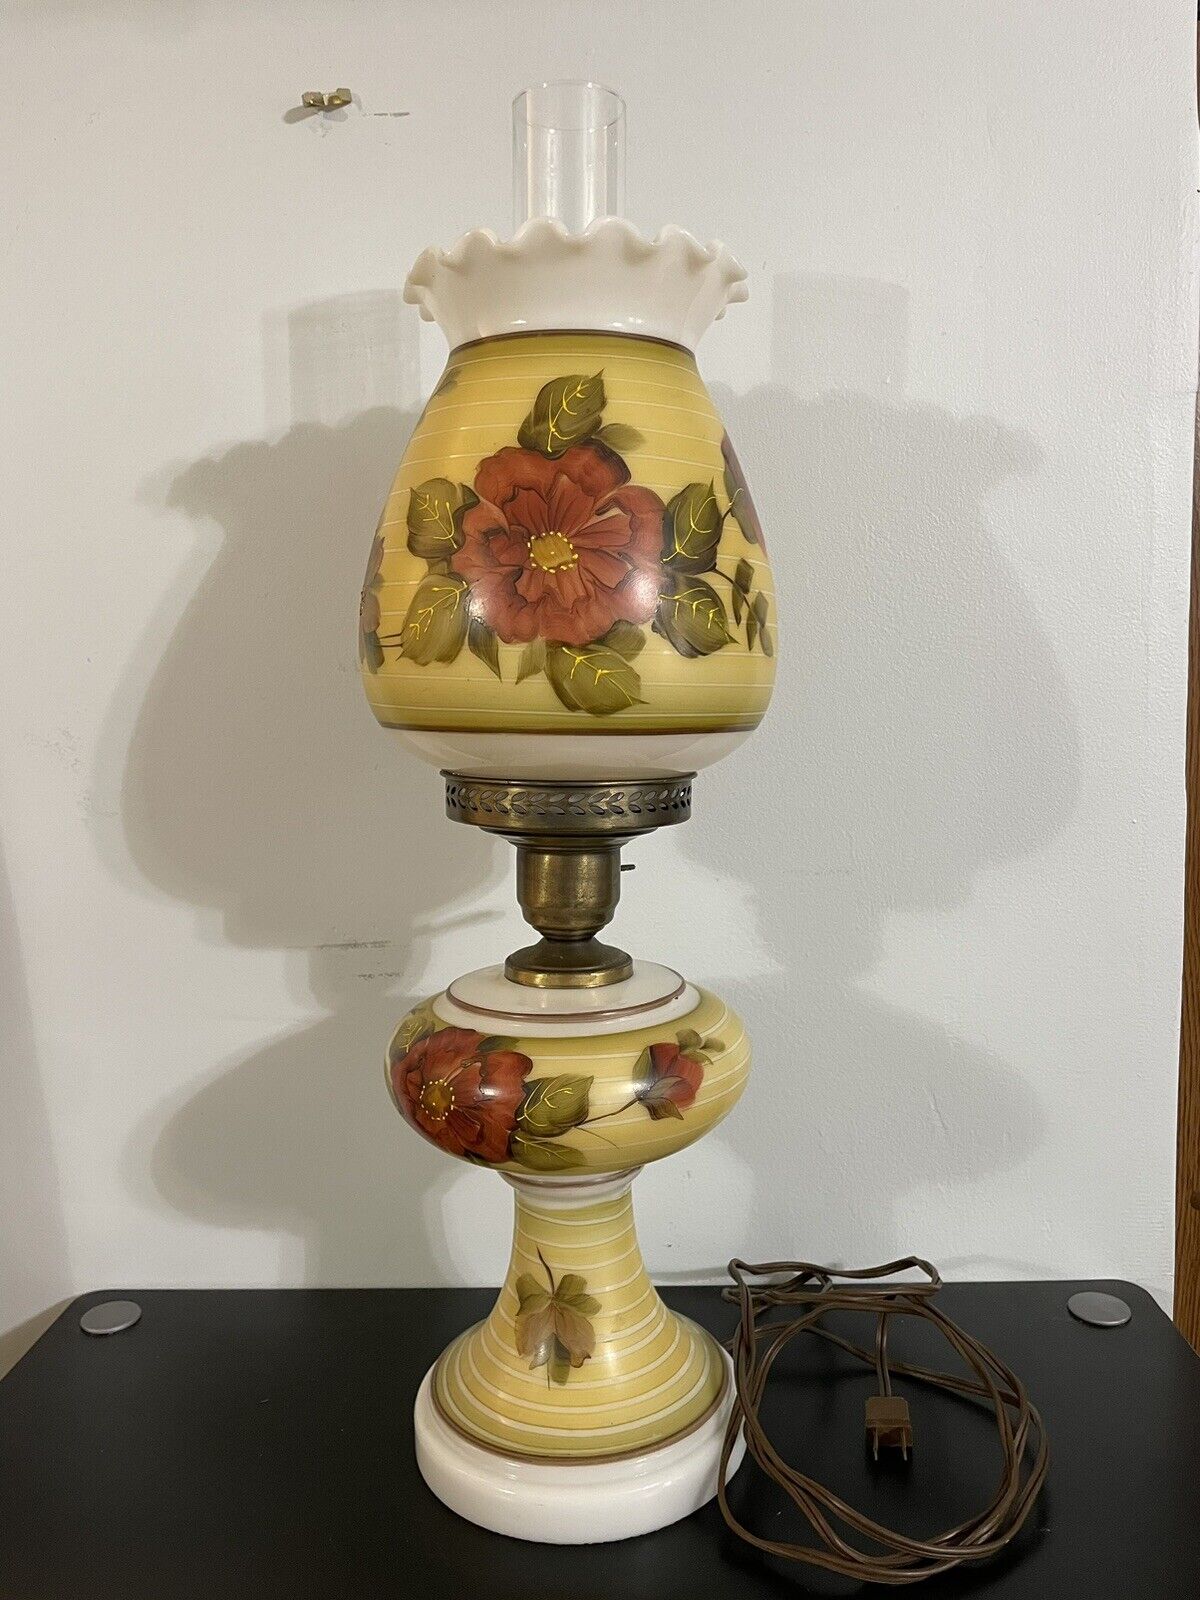 Vintage Double Globe 3 Way Switch Floral Parlour Hurricane Lamp. Great Condition